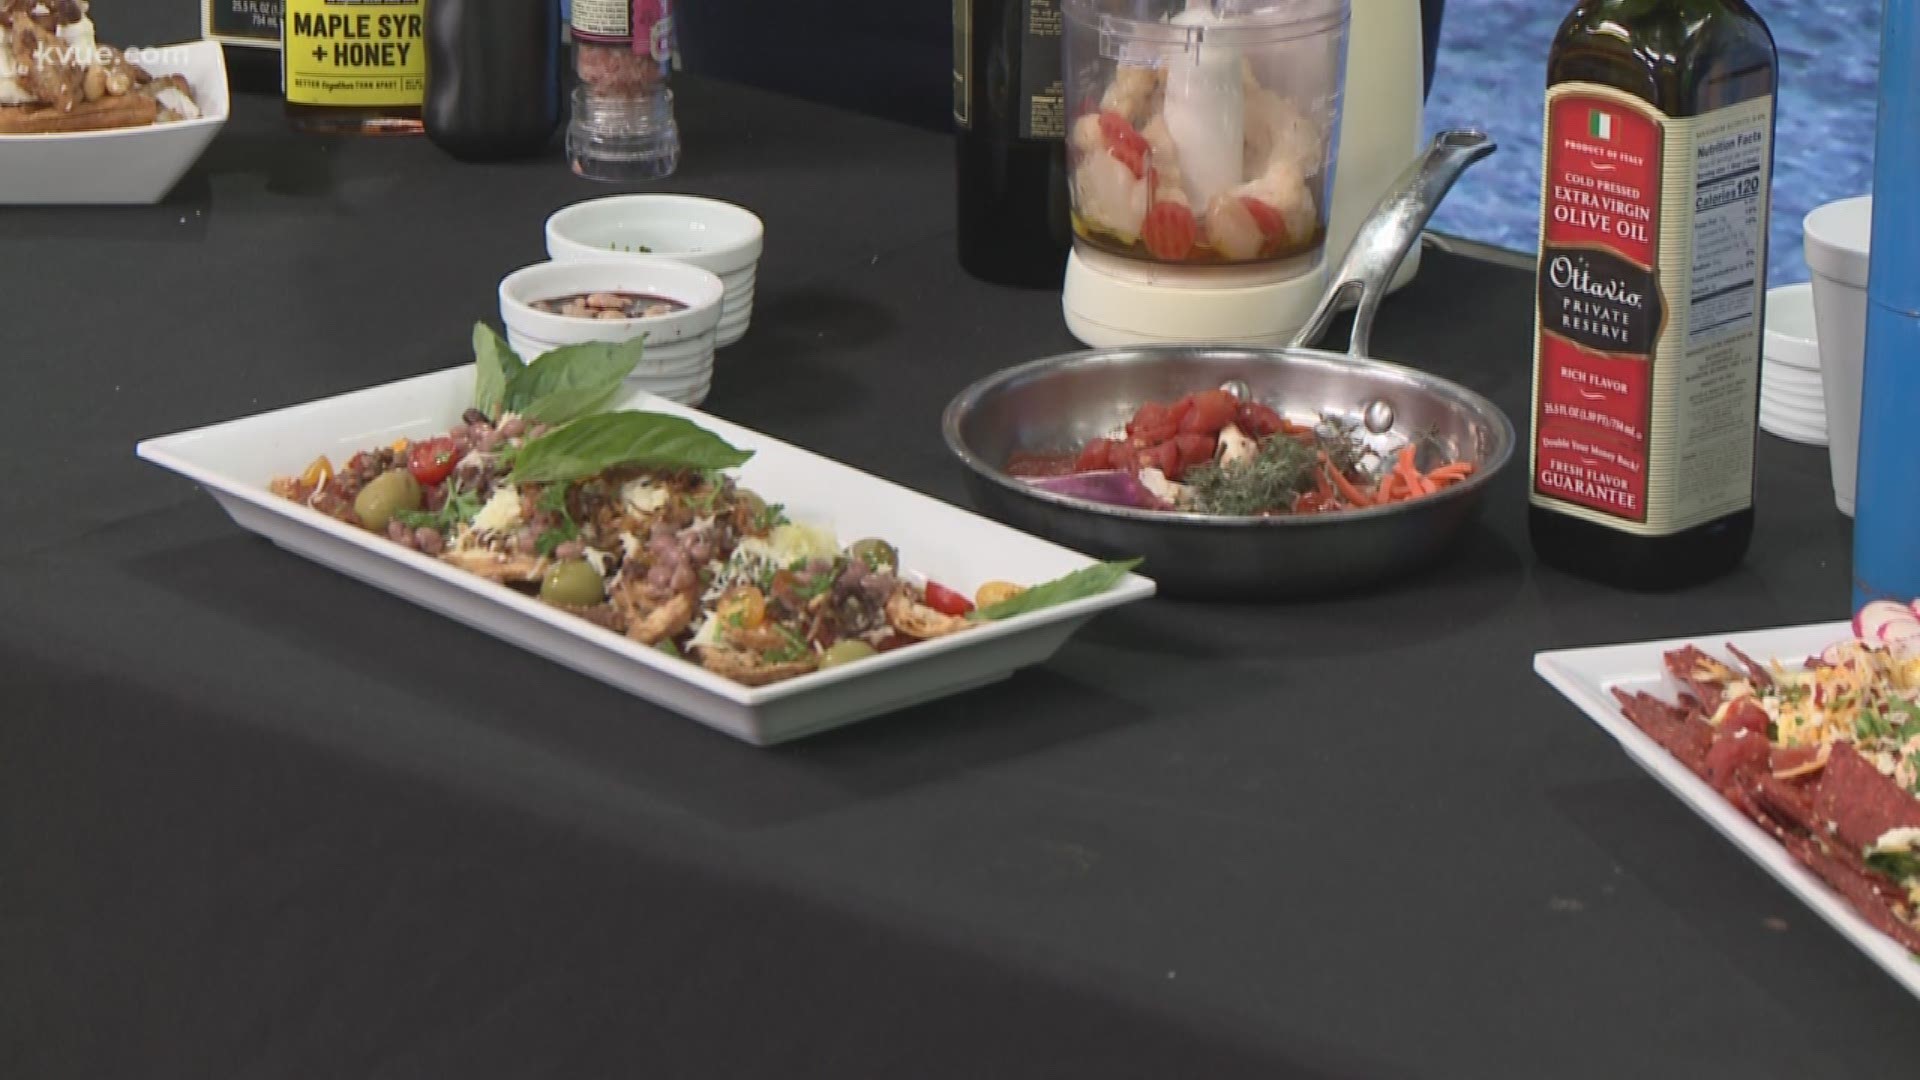 Wednesday is National Taco Day and owner of Complete Eats, Chef Adrian Perez, who has appeared in the Food Network, is at KVUE to show us different nachos.